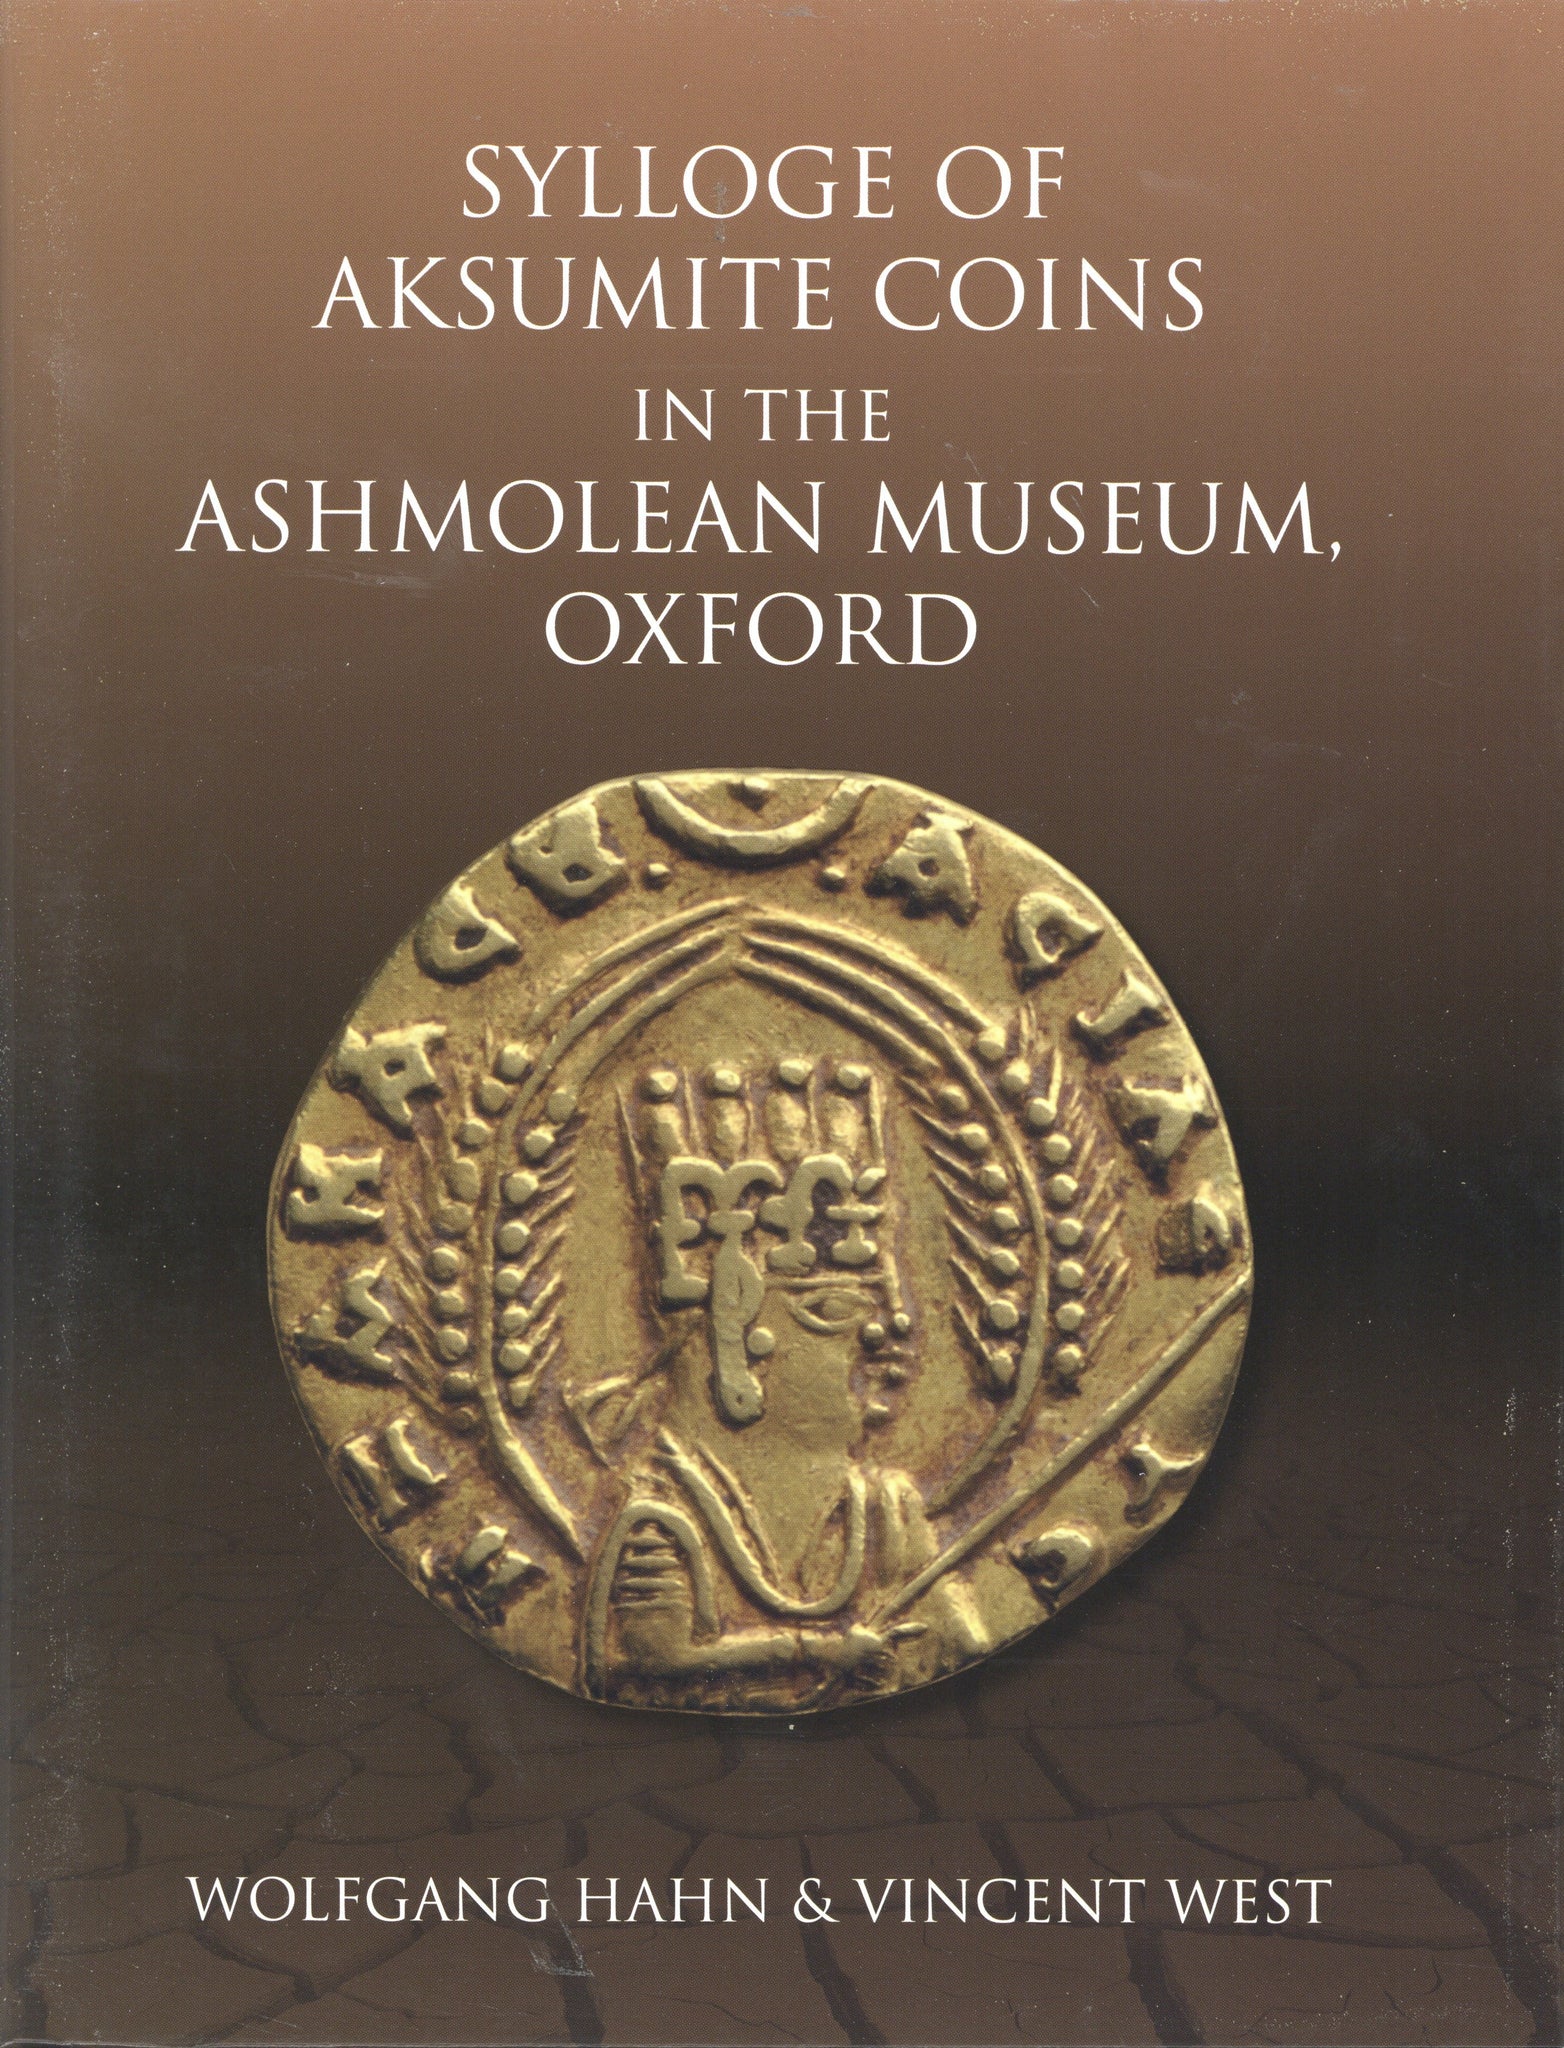 Sylloge of Aksumite Coins in the Ashmolean Museum Oxford by Hahn, W & West, V.